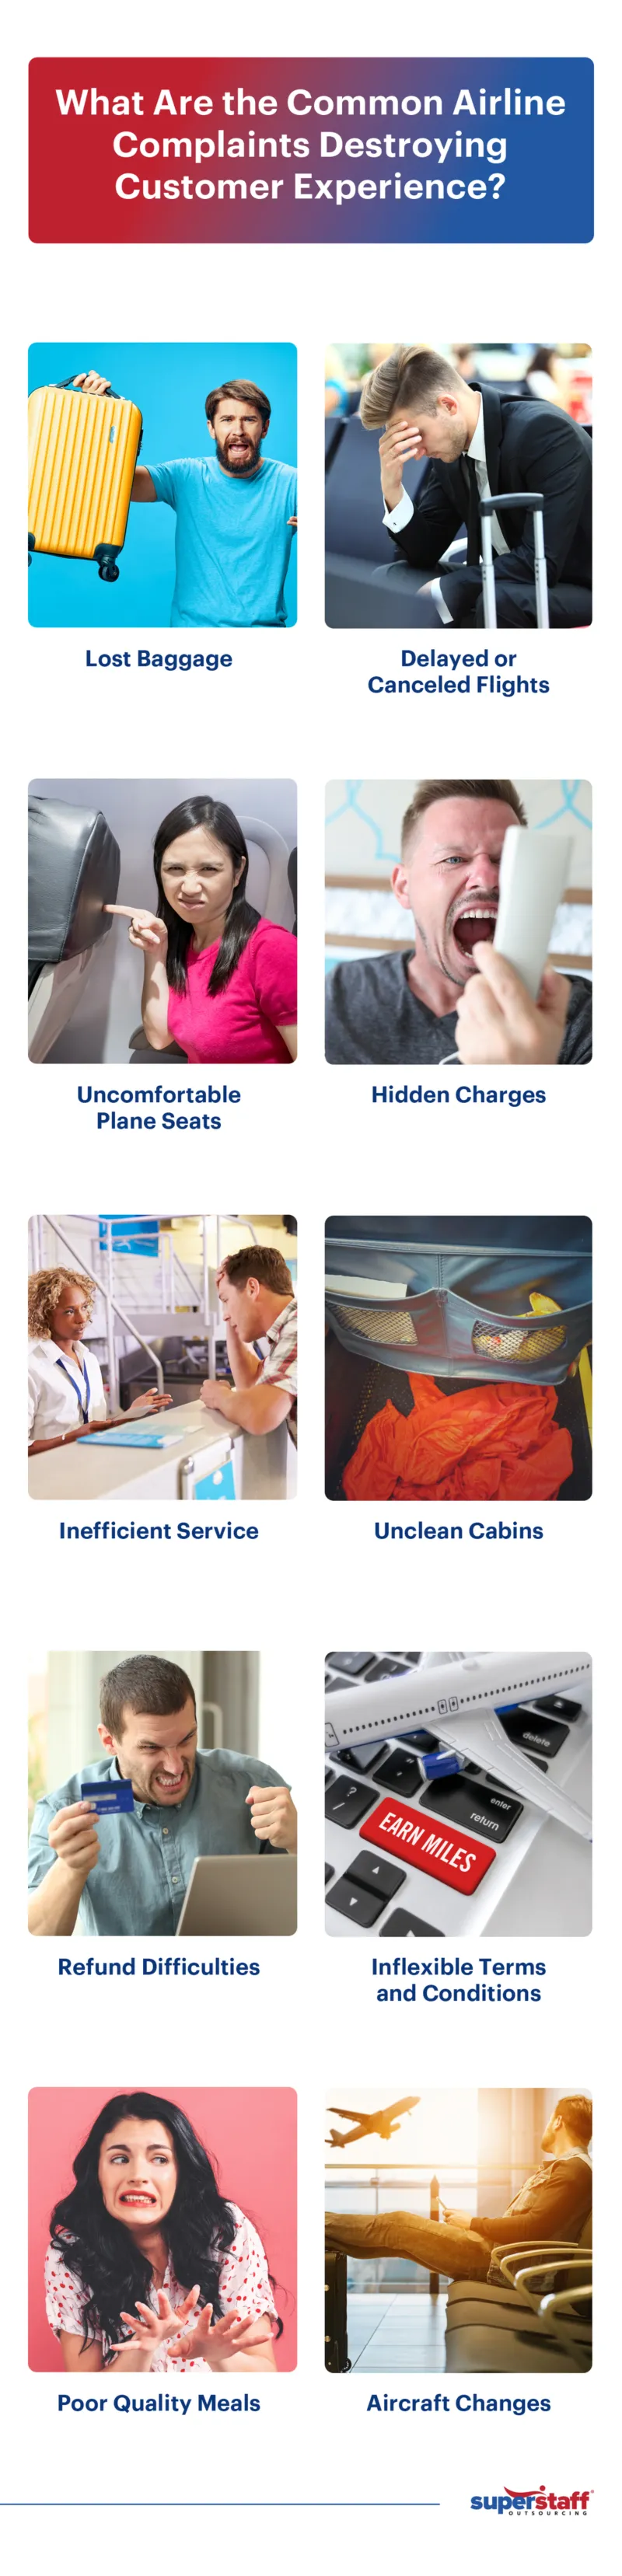 A mini infographic shows the most common customer complaints from airline passengers.